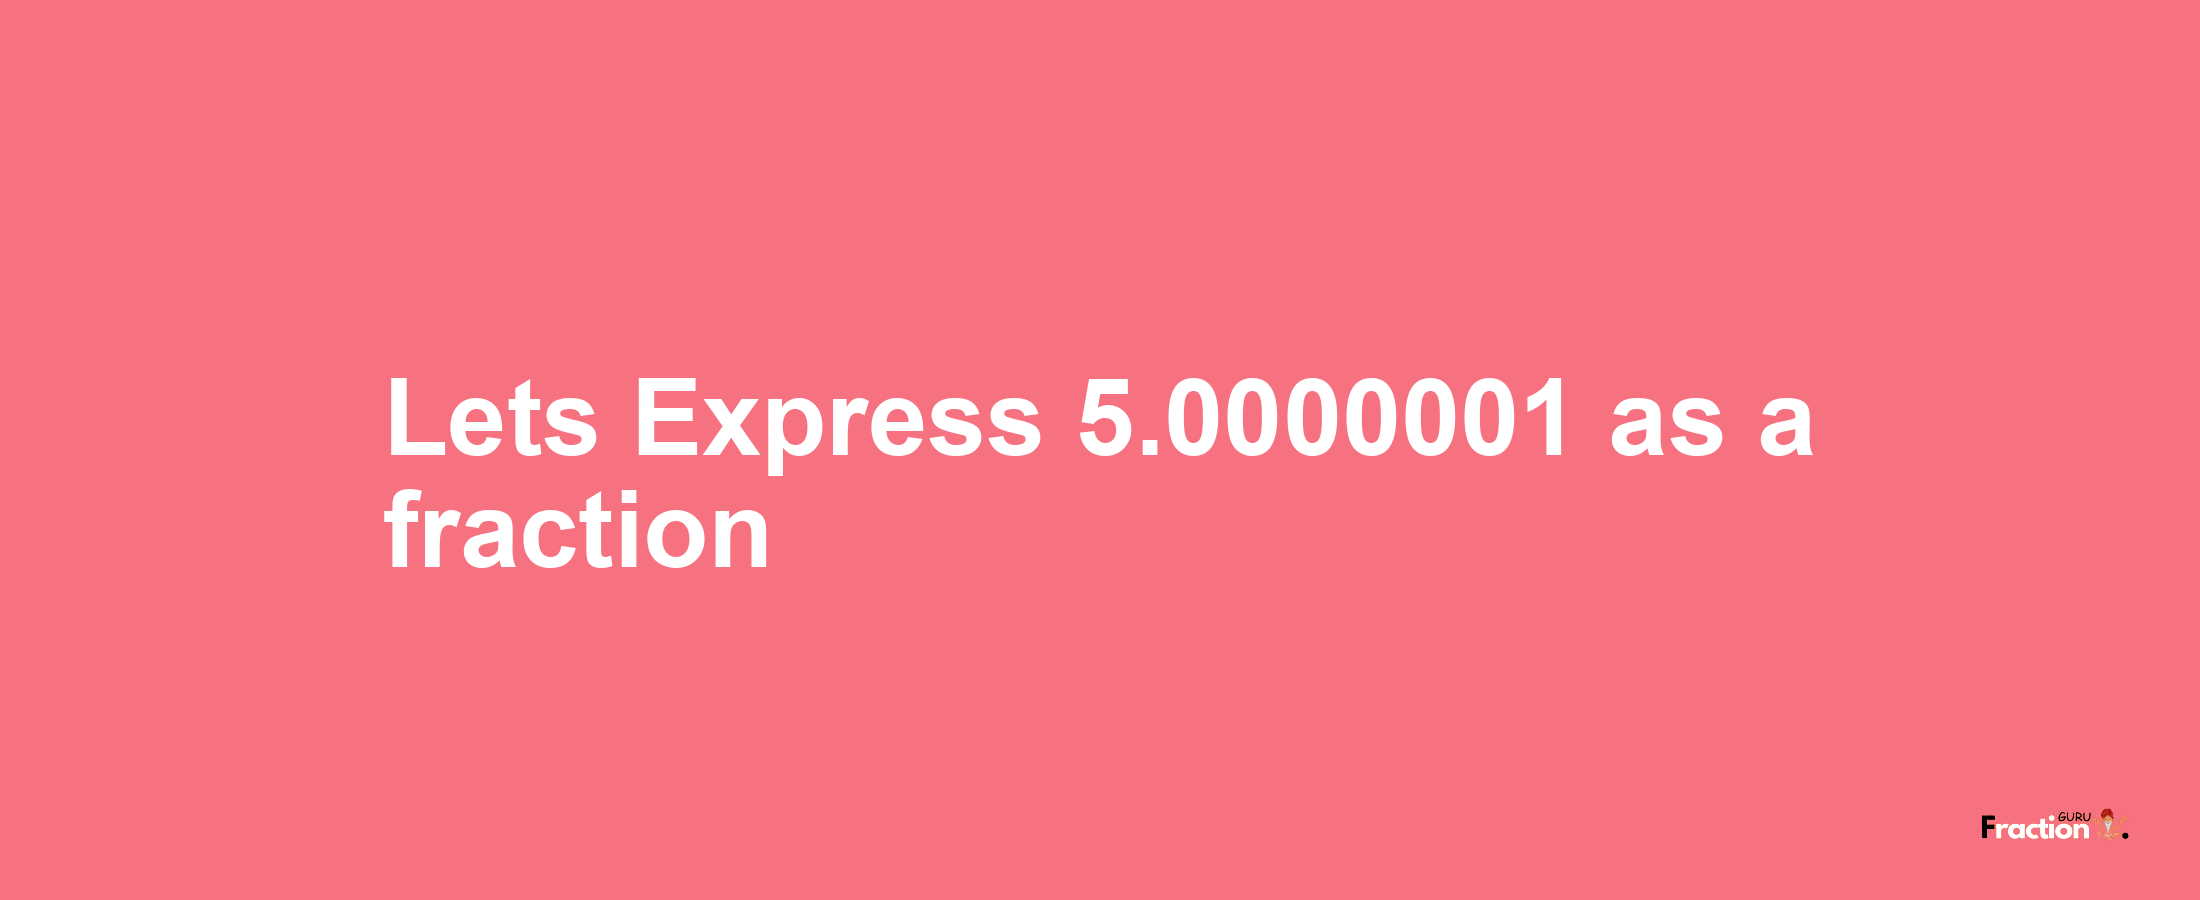 Lets Express 5.0000001 as afraction